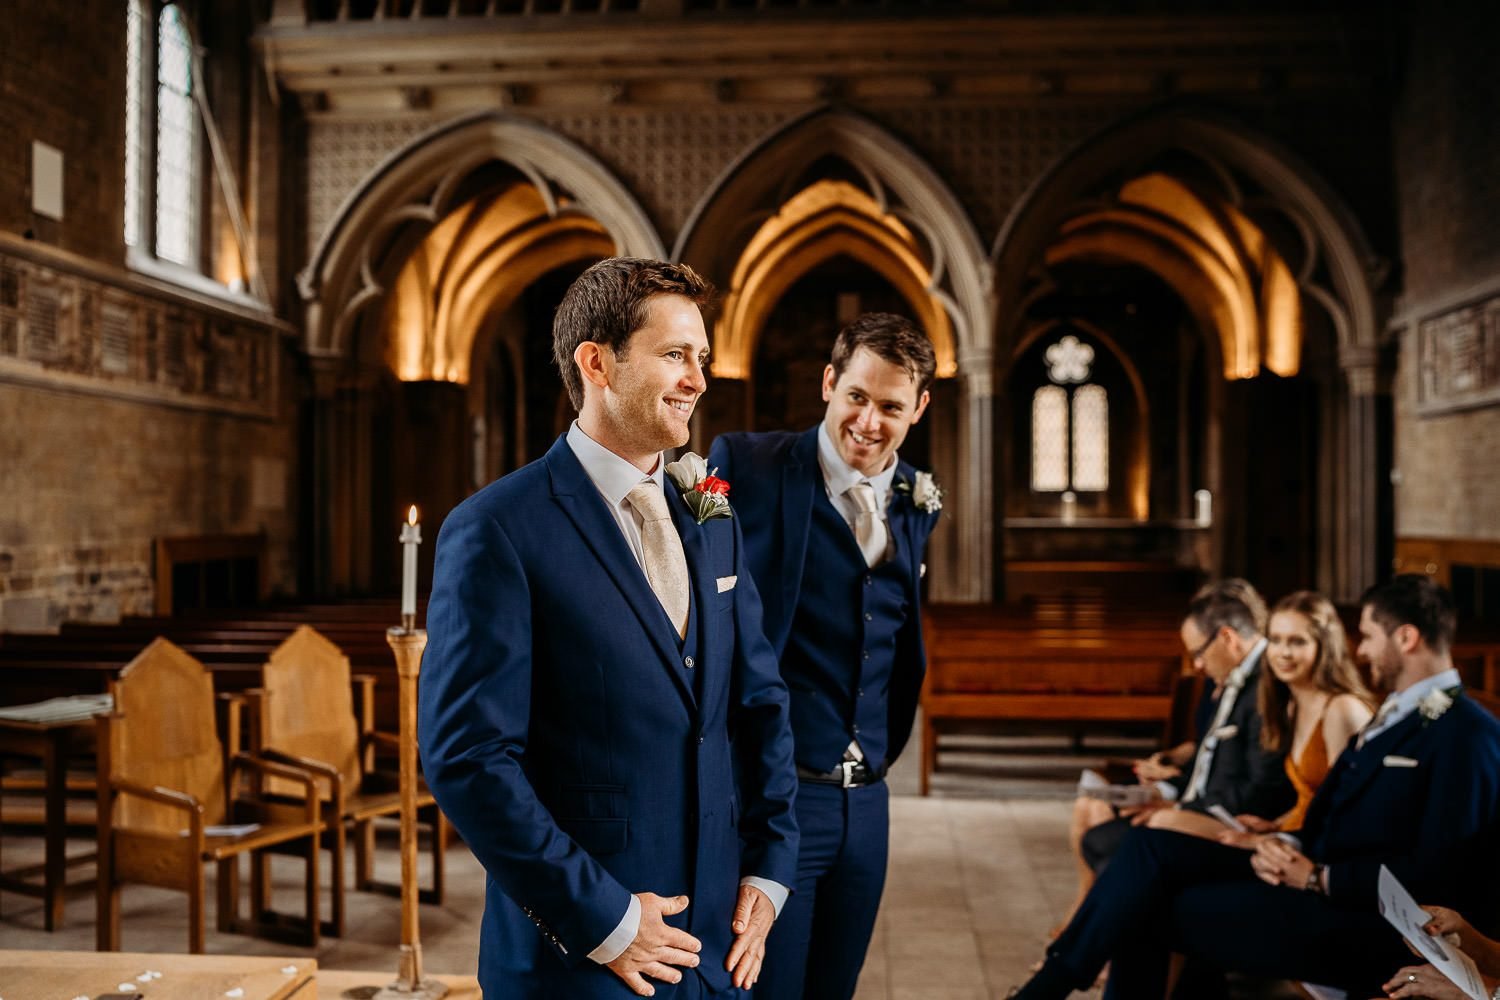 groom and brother smiling while waiting for bride at alter